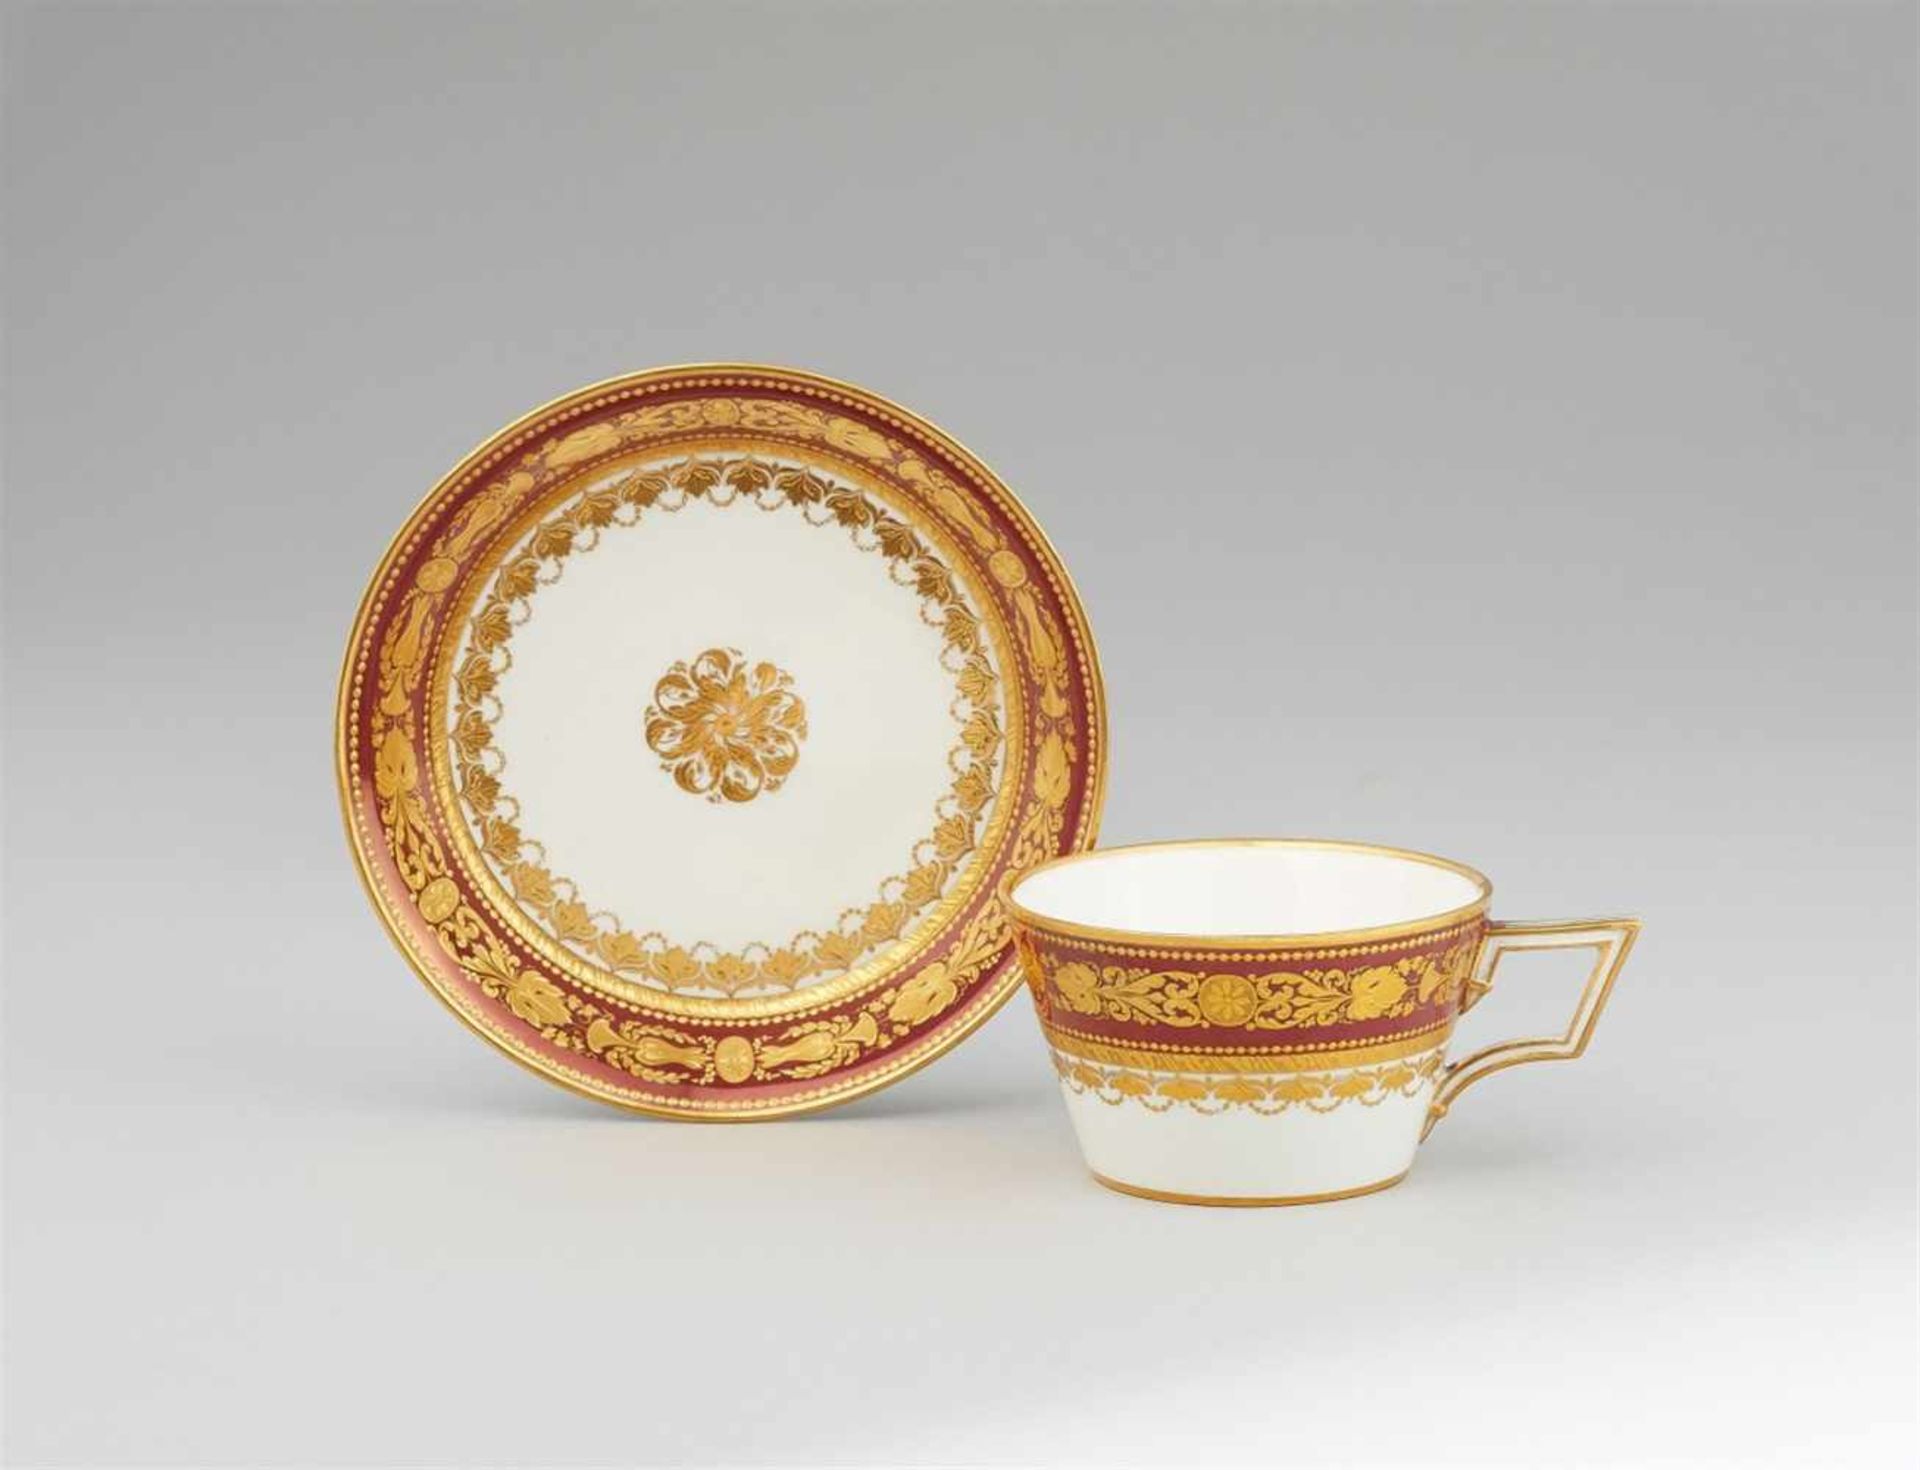 A Vienna porcelain cup and saucer with a lustre borderOf conical form with original saucer. Blue